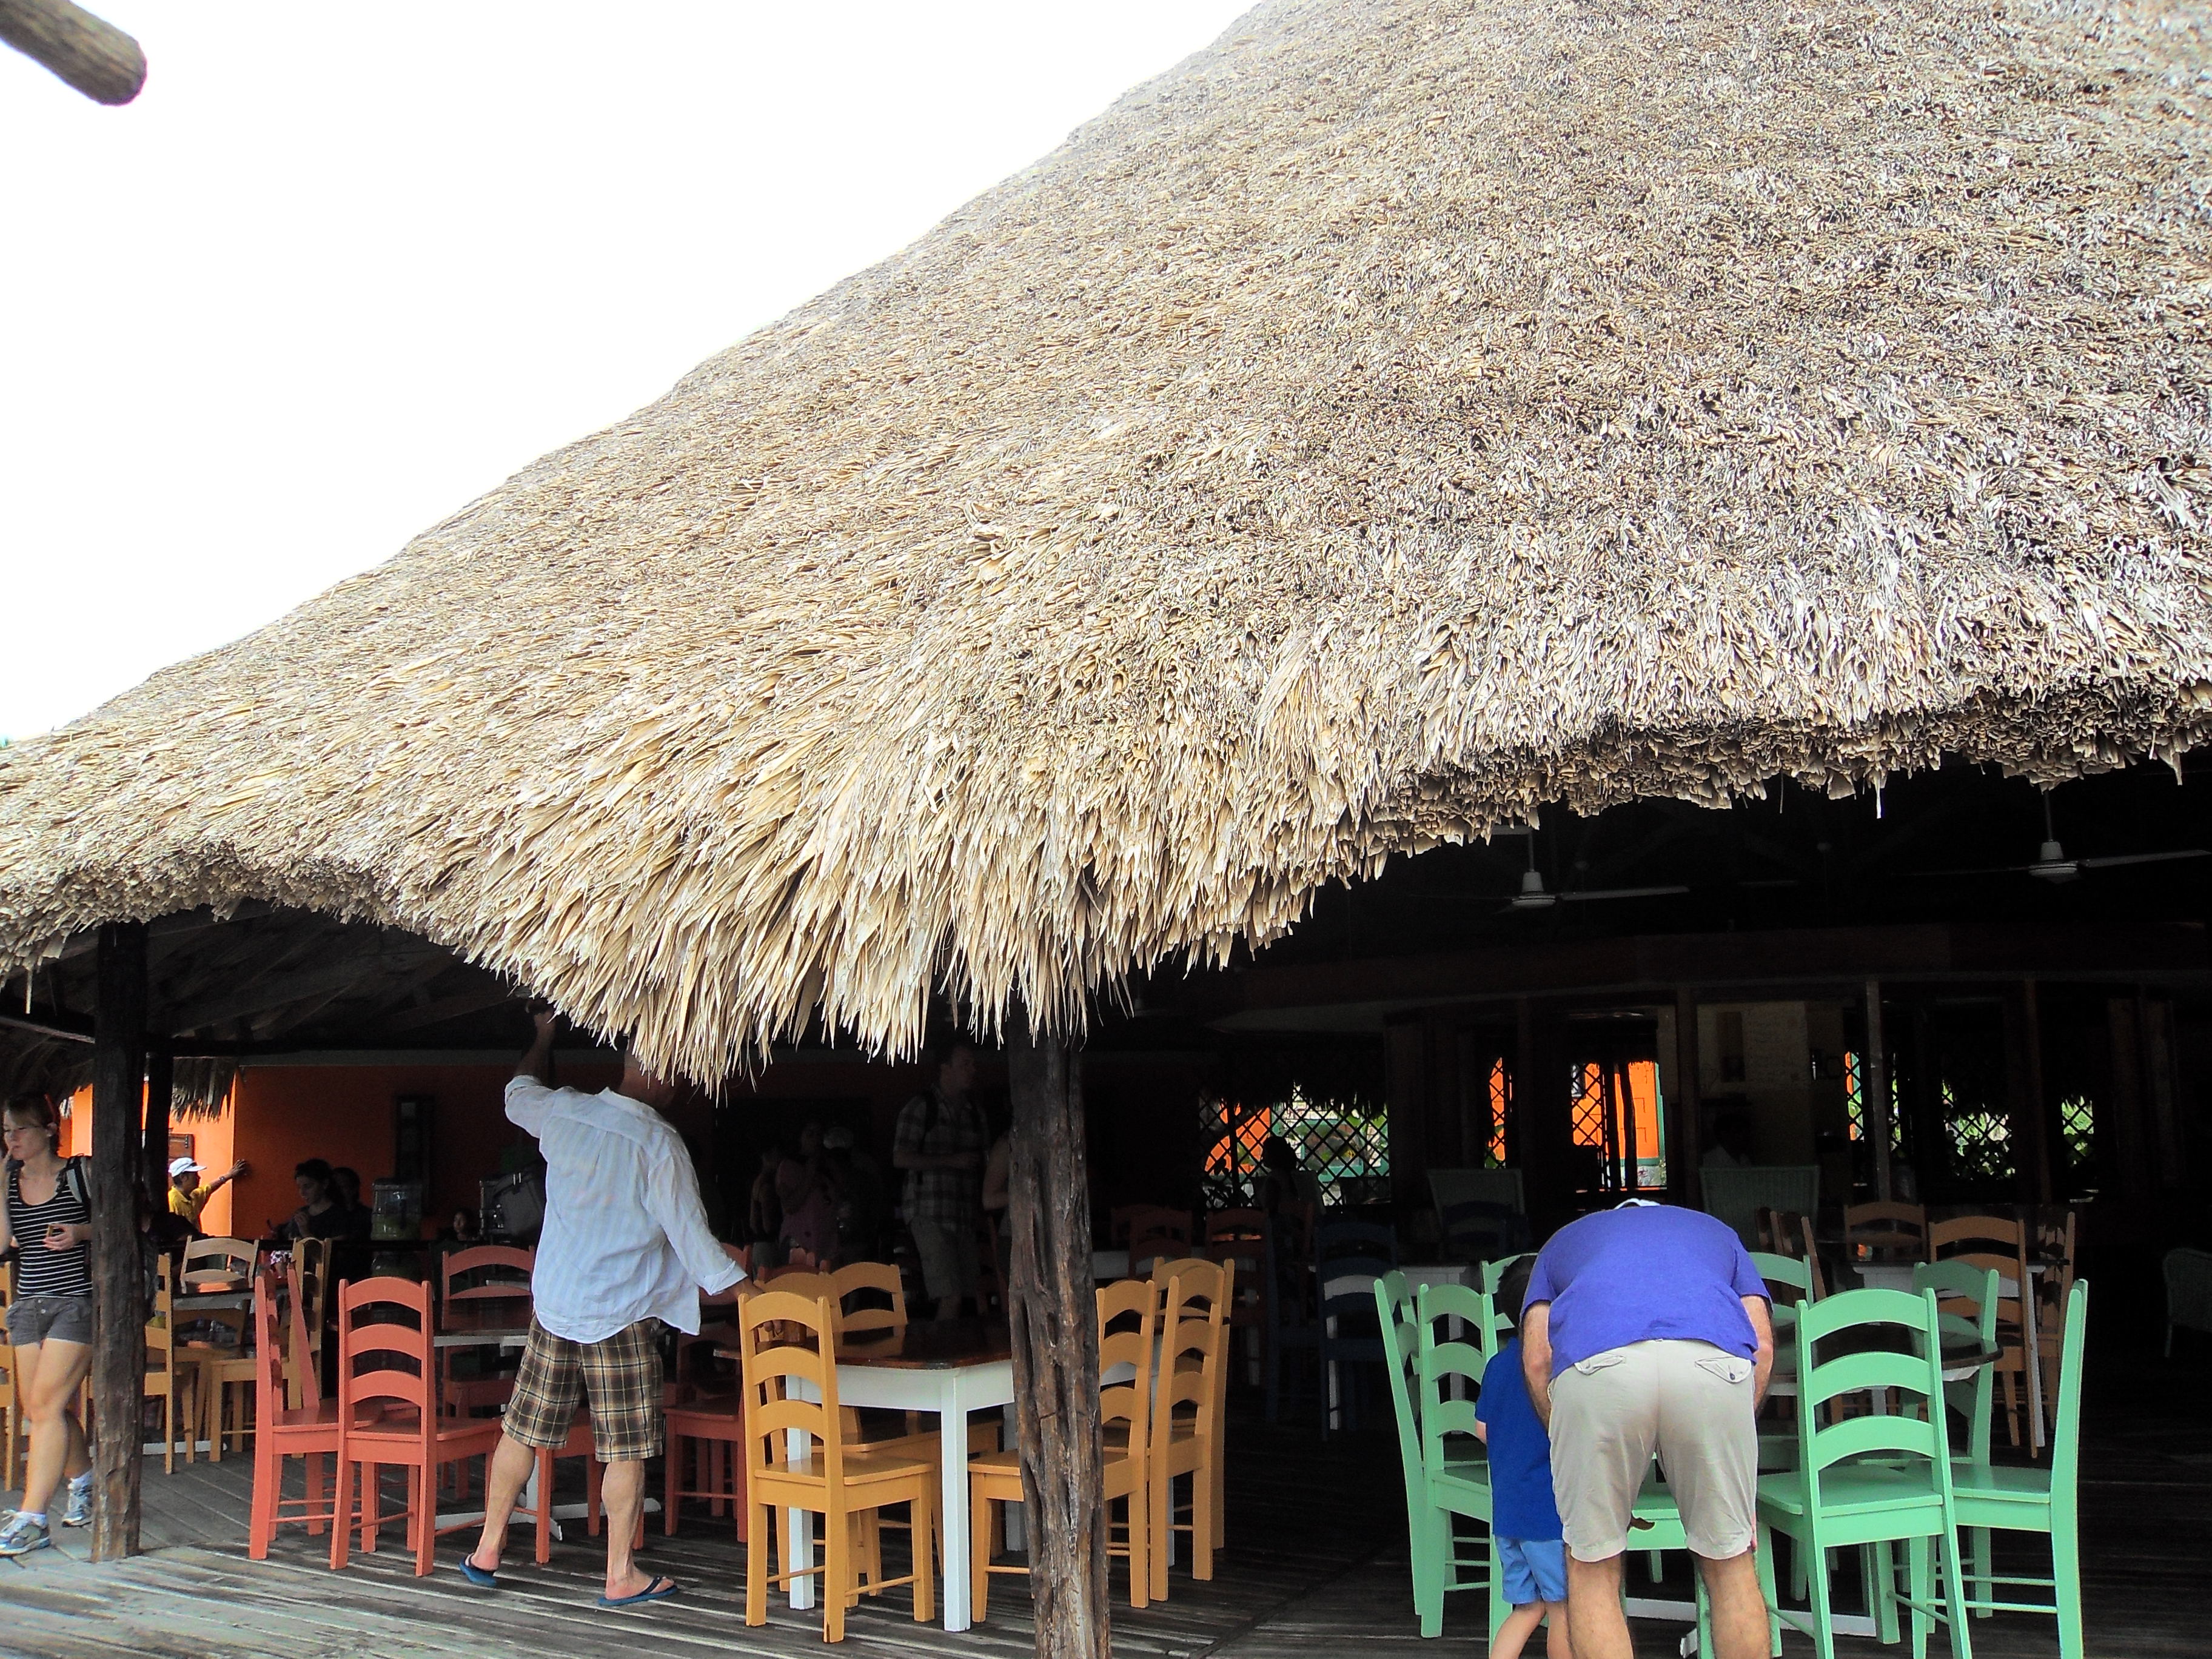 Restaurant along the road to Lamanai, Belize